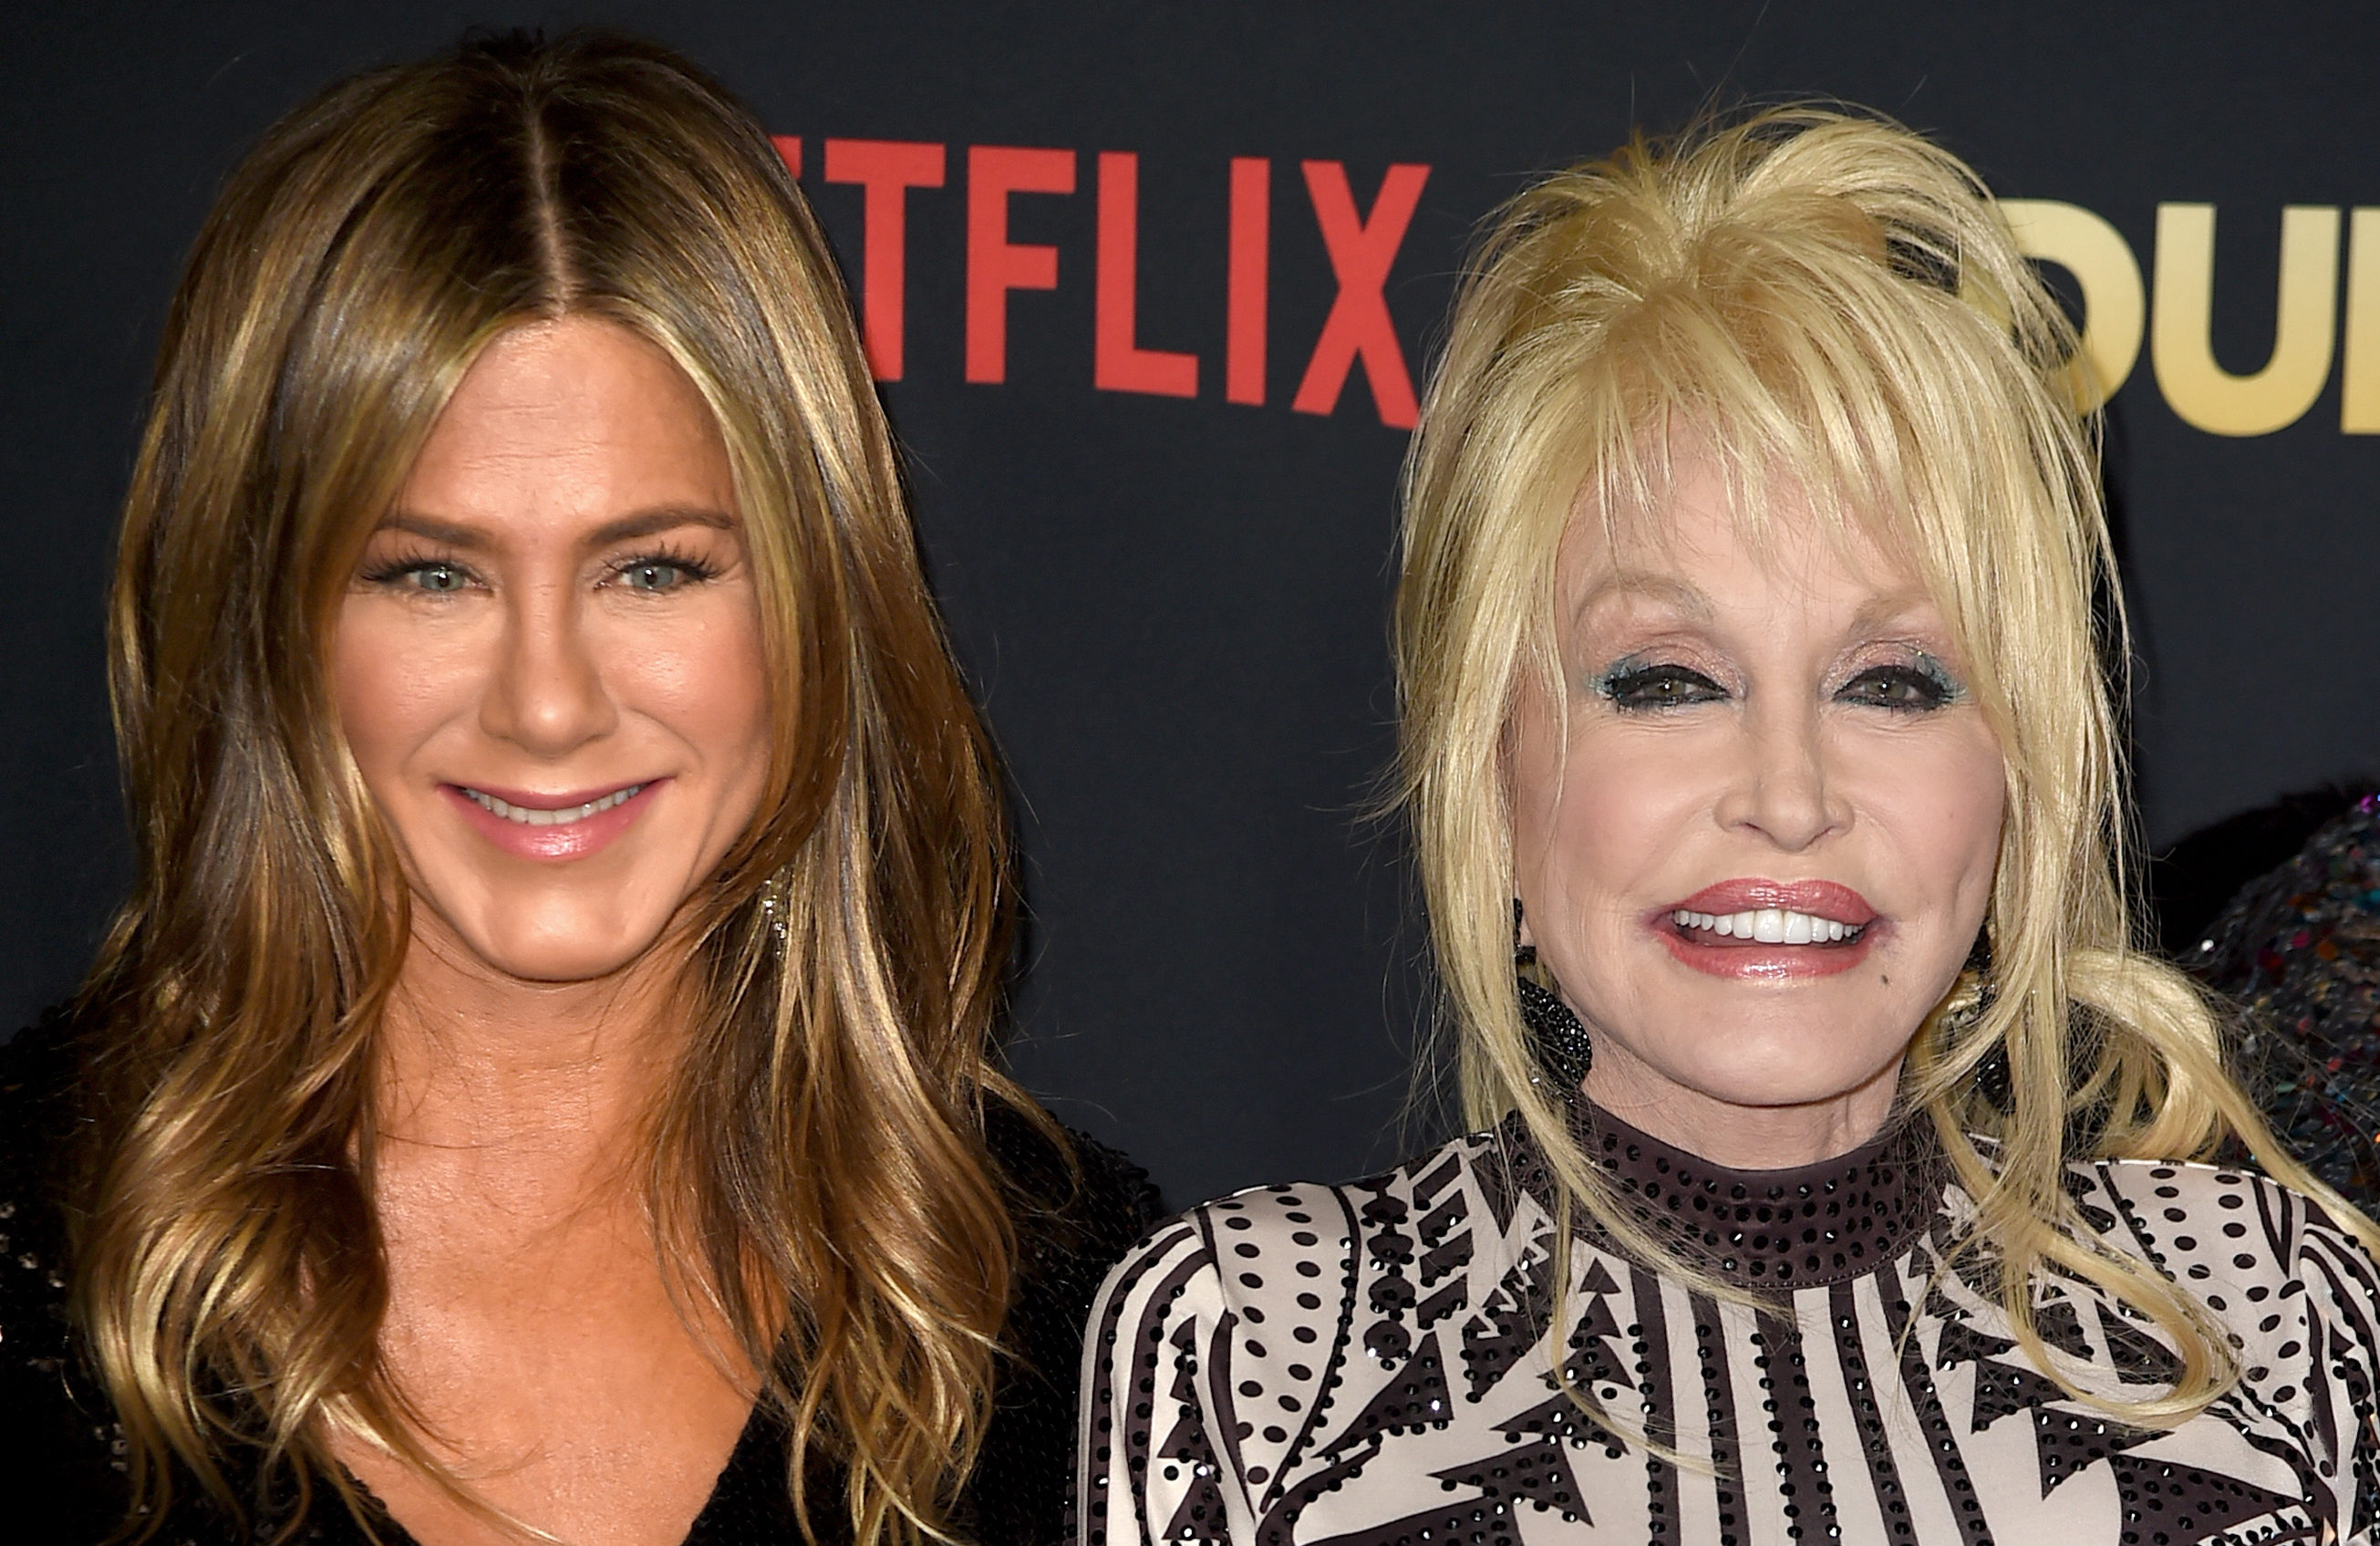 Jennifer Aniston (L) and Dolly Parton arrive at the premiere of Netflix's "Dumplin'"  (Kevin Winter/Getty Images)